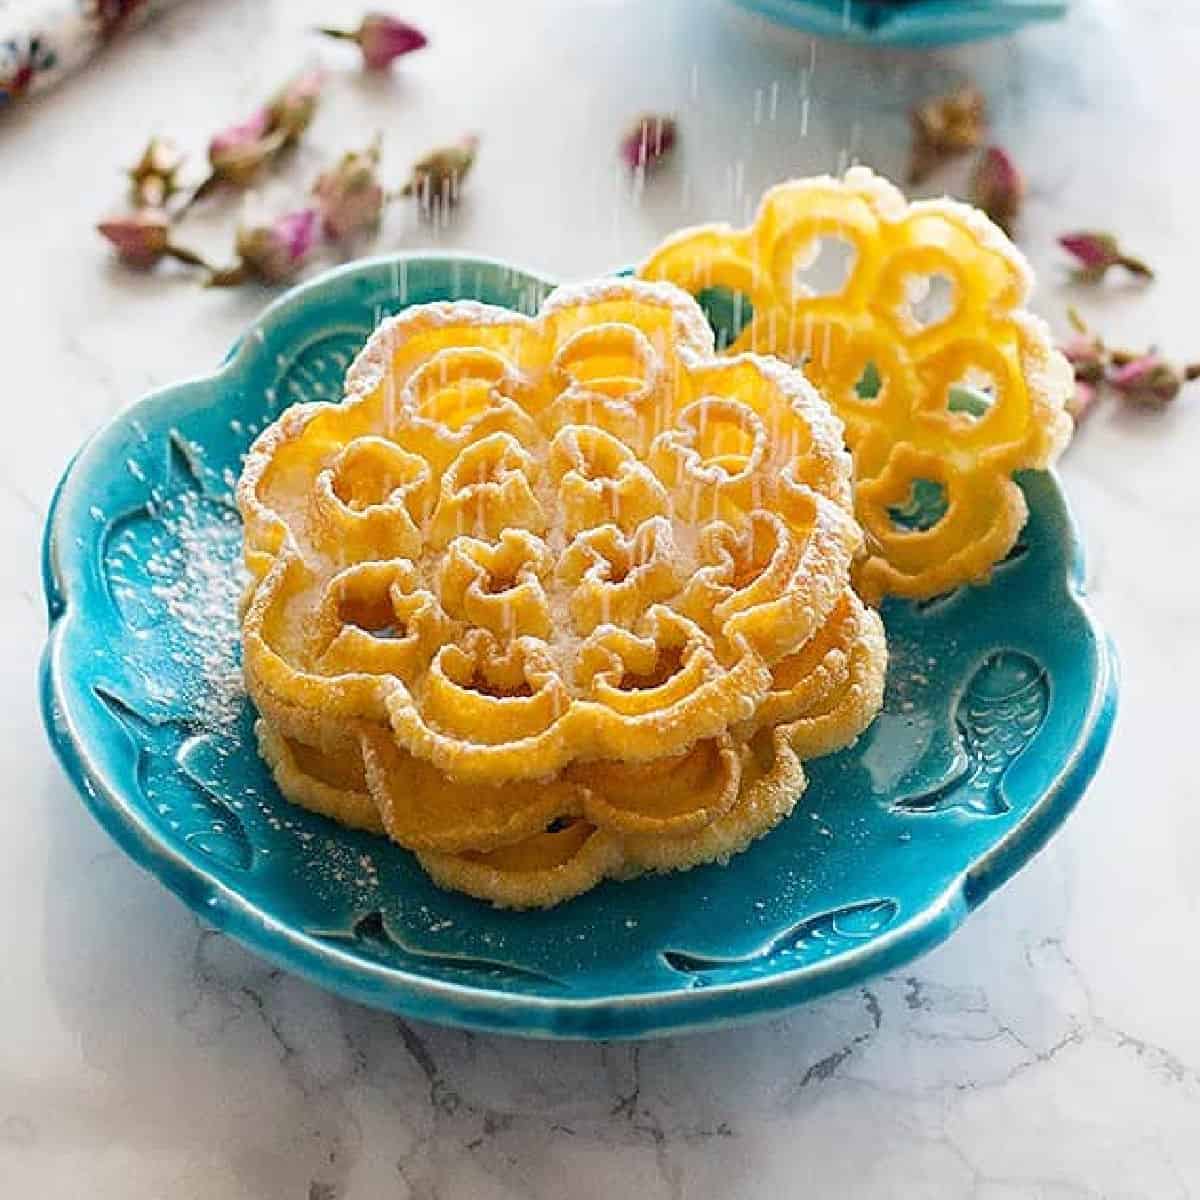 Nan Panjereh - Persian Rosettes is a traditional Persian cookie that is crisp and light. Once you find the technique, it is easy and fun to make!
